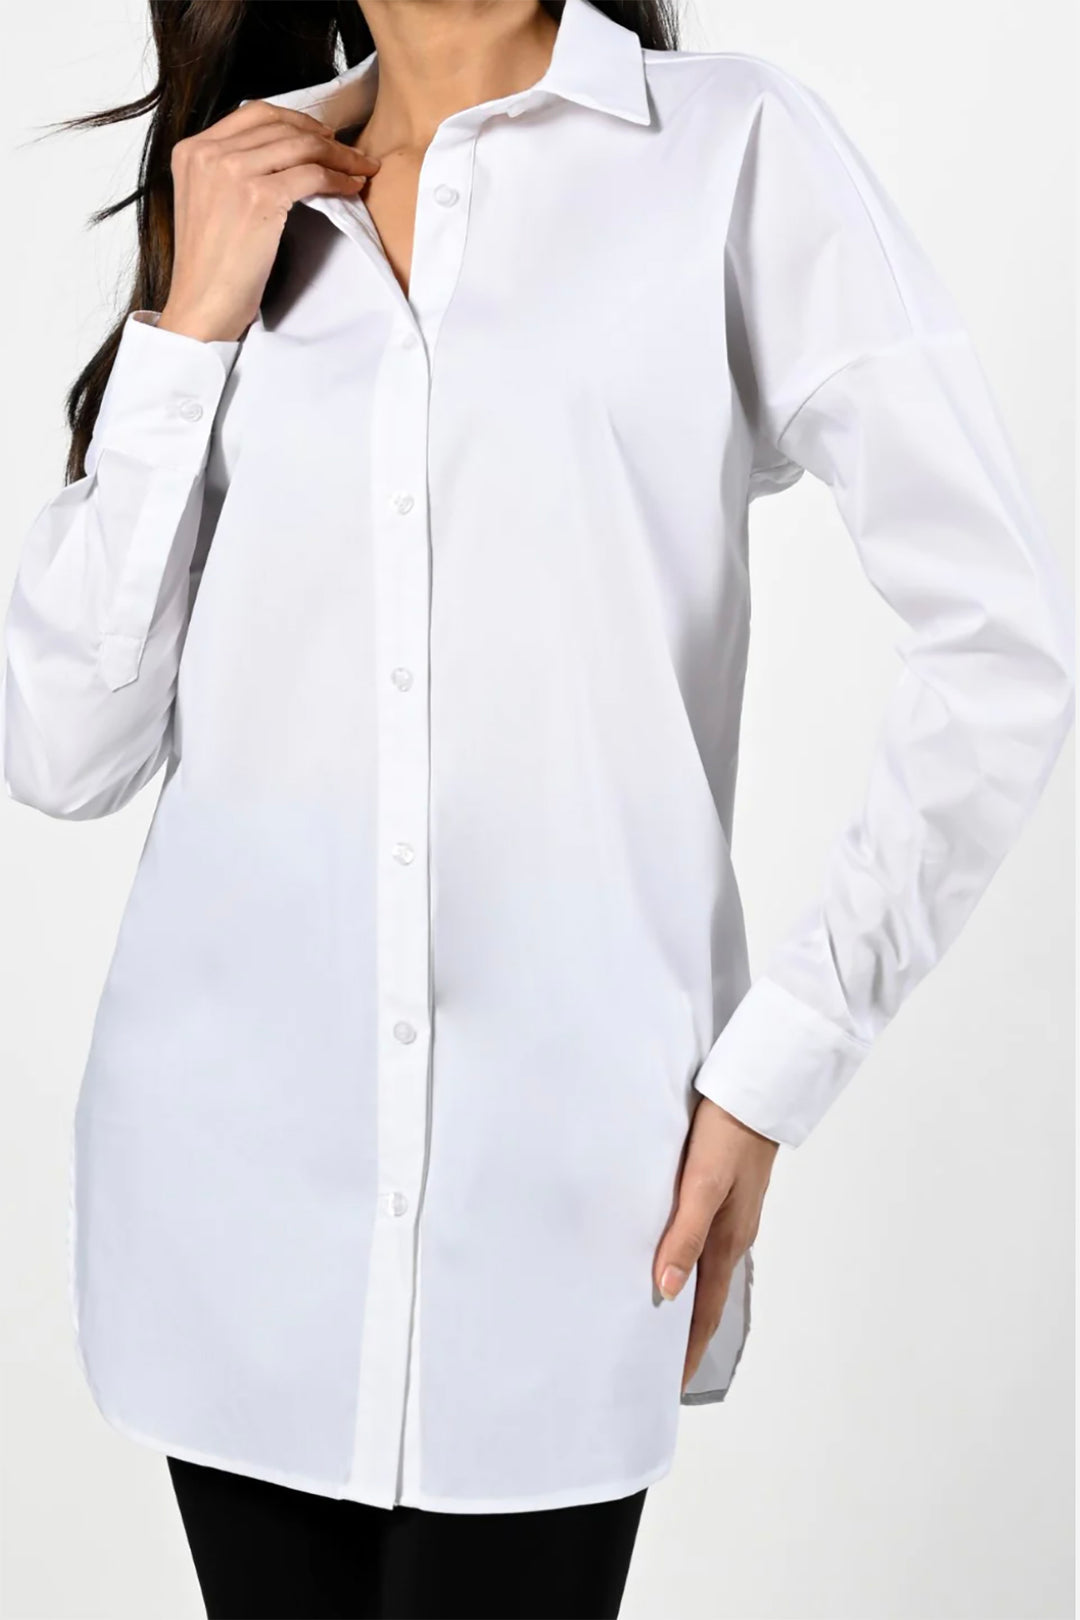 Woman wearing the Bianca shirt by Frank Lyman in white, sold and shipped from Pizazz Boutique